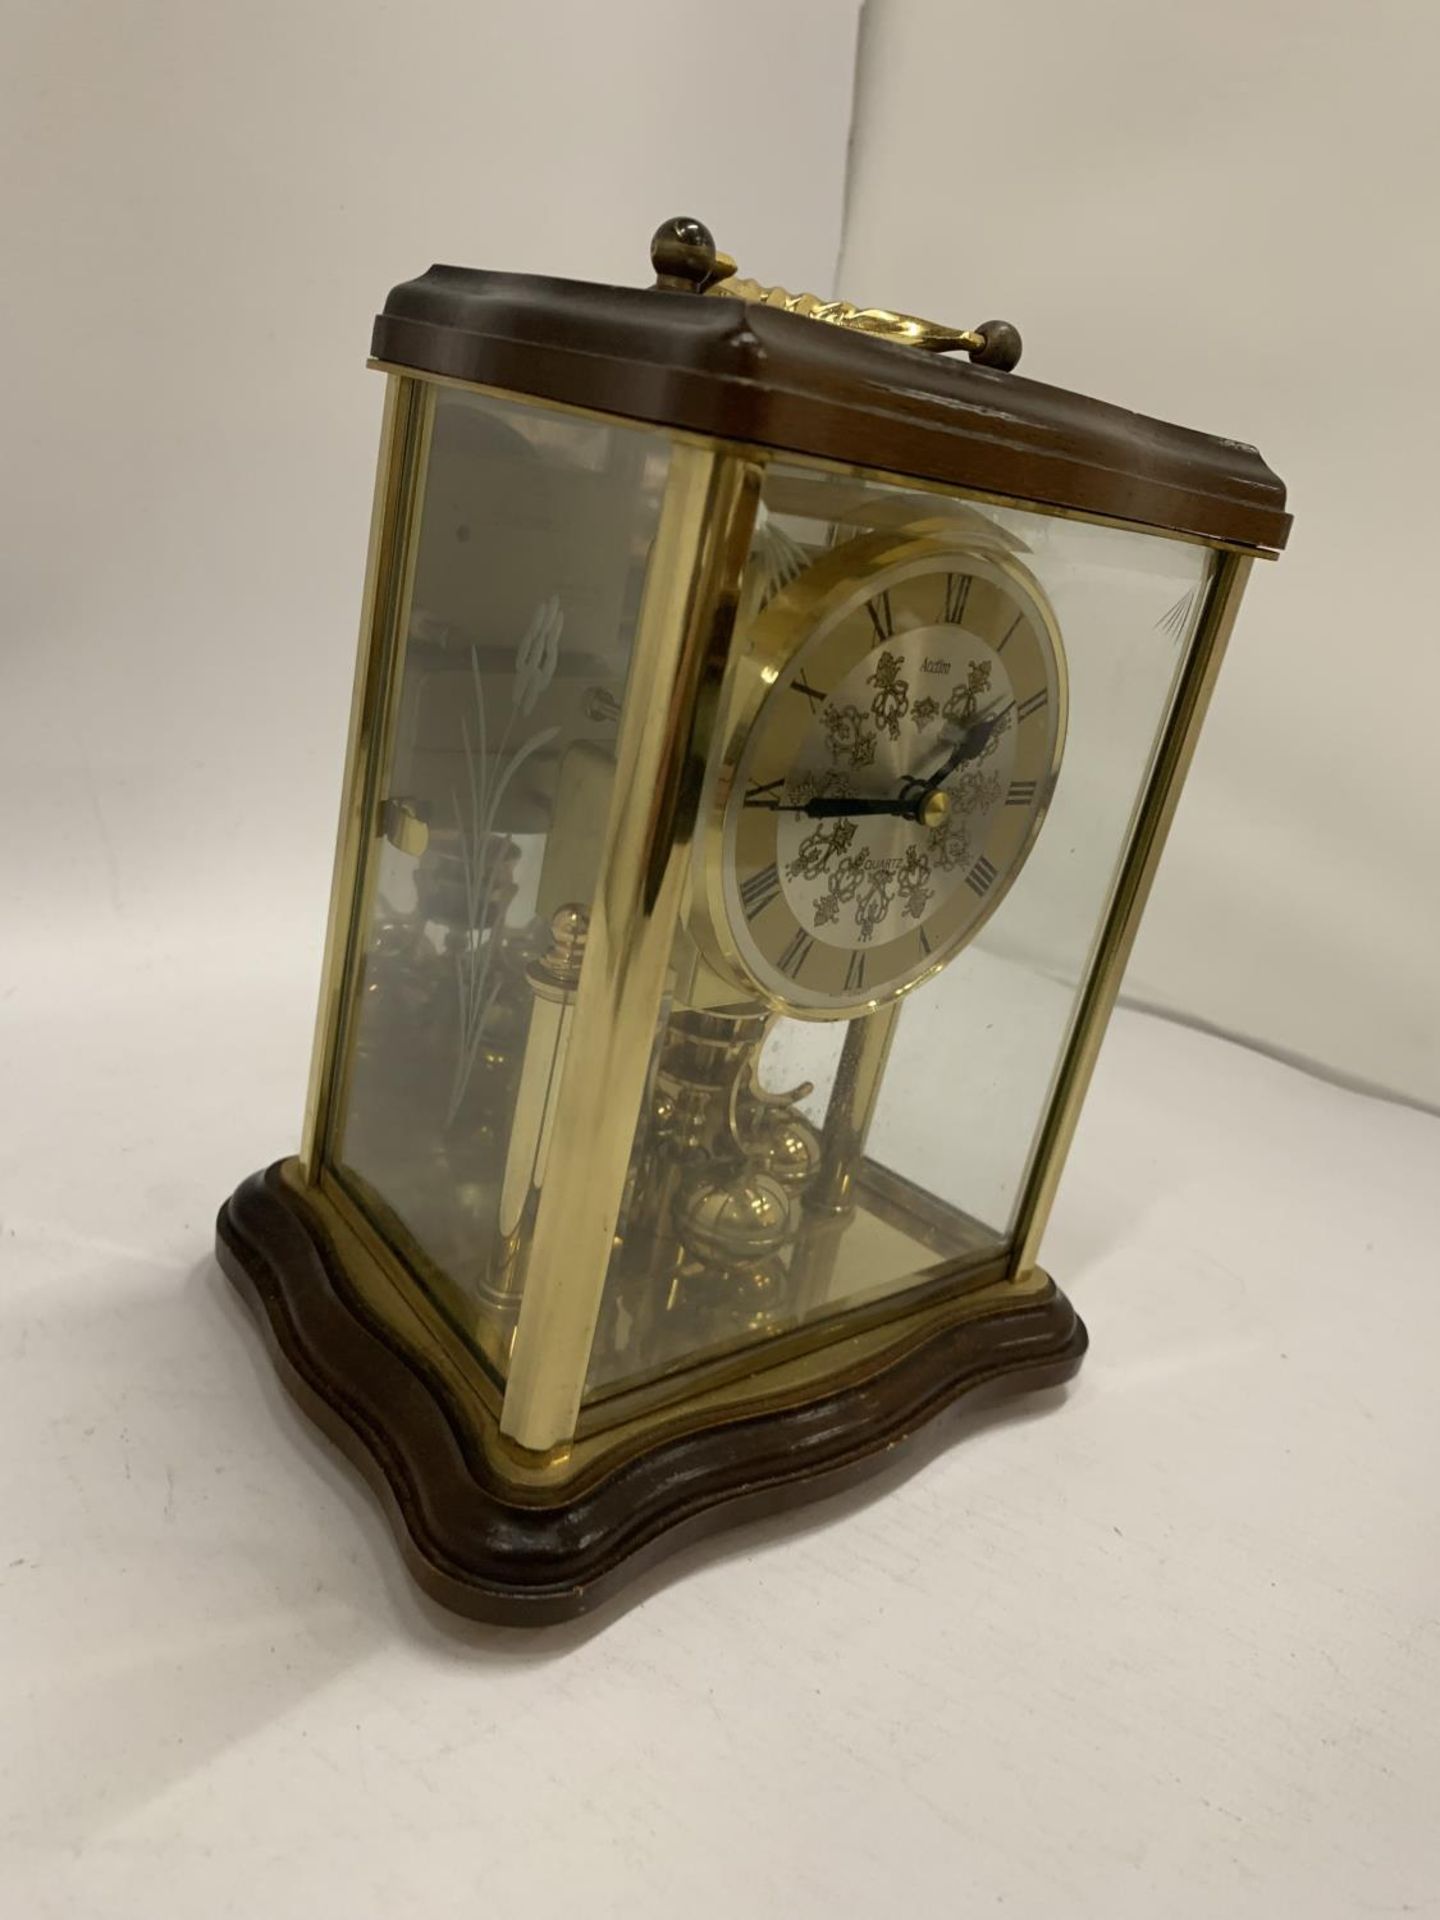 A WOOD AND GLASS CASED ANNIVERSARY CLOCK MADE BY ACCTIM - Image 4 of 8